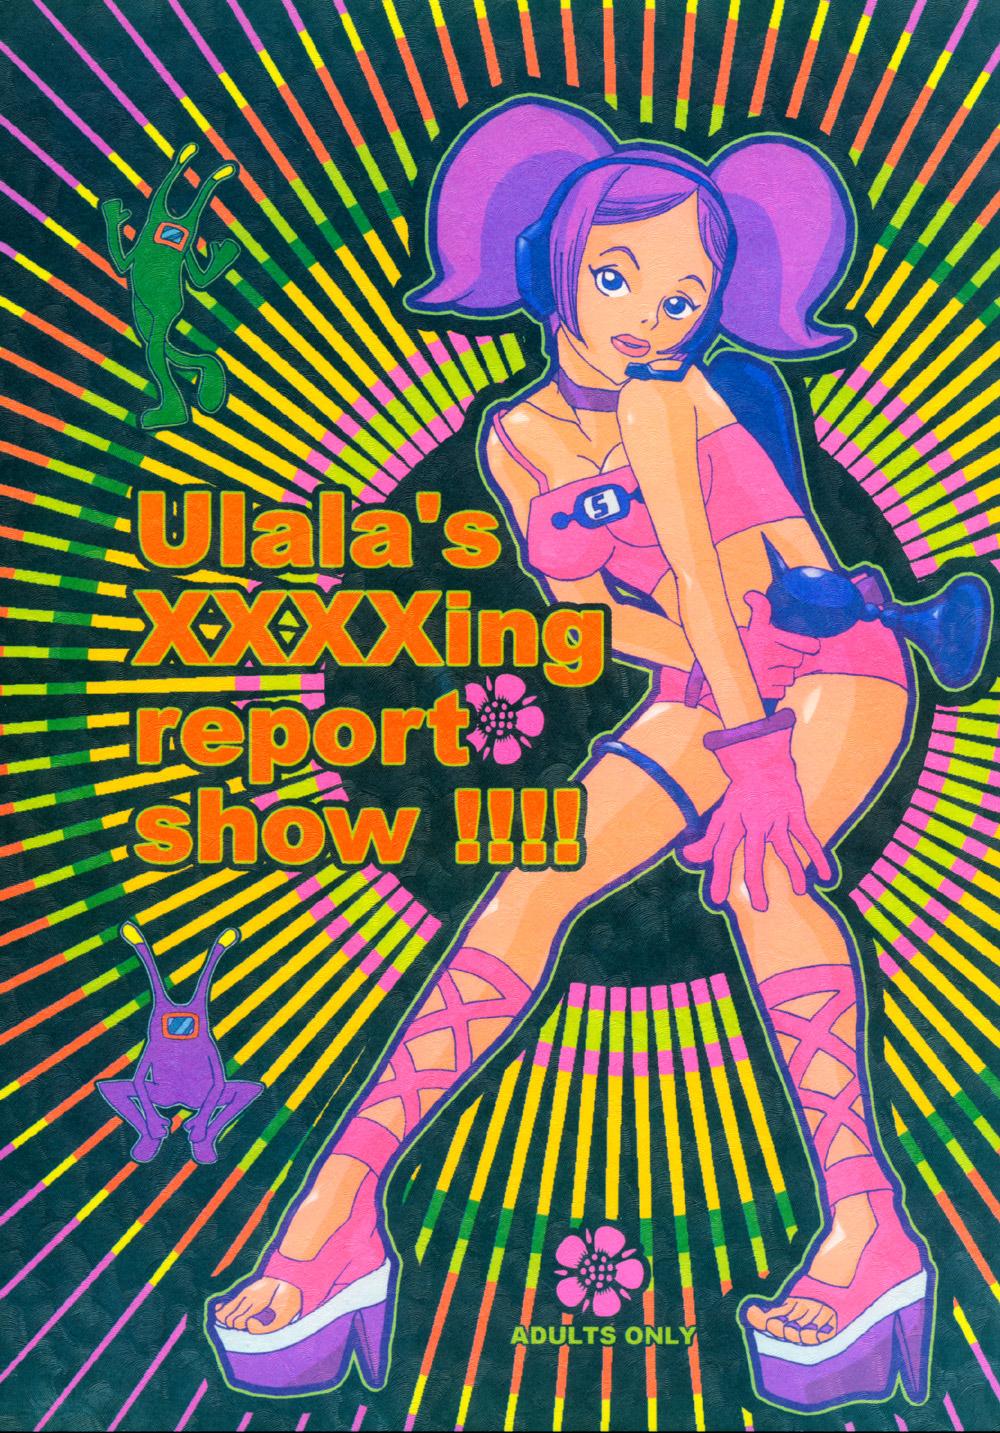 Ulala's XXXXing Report Show!!!! 0